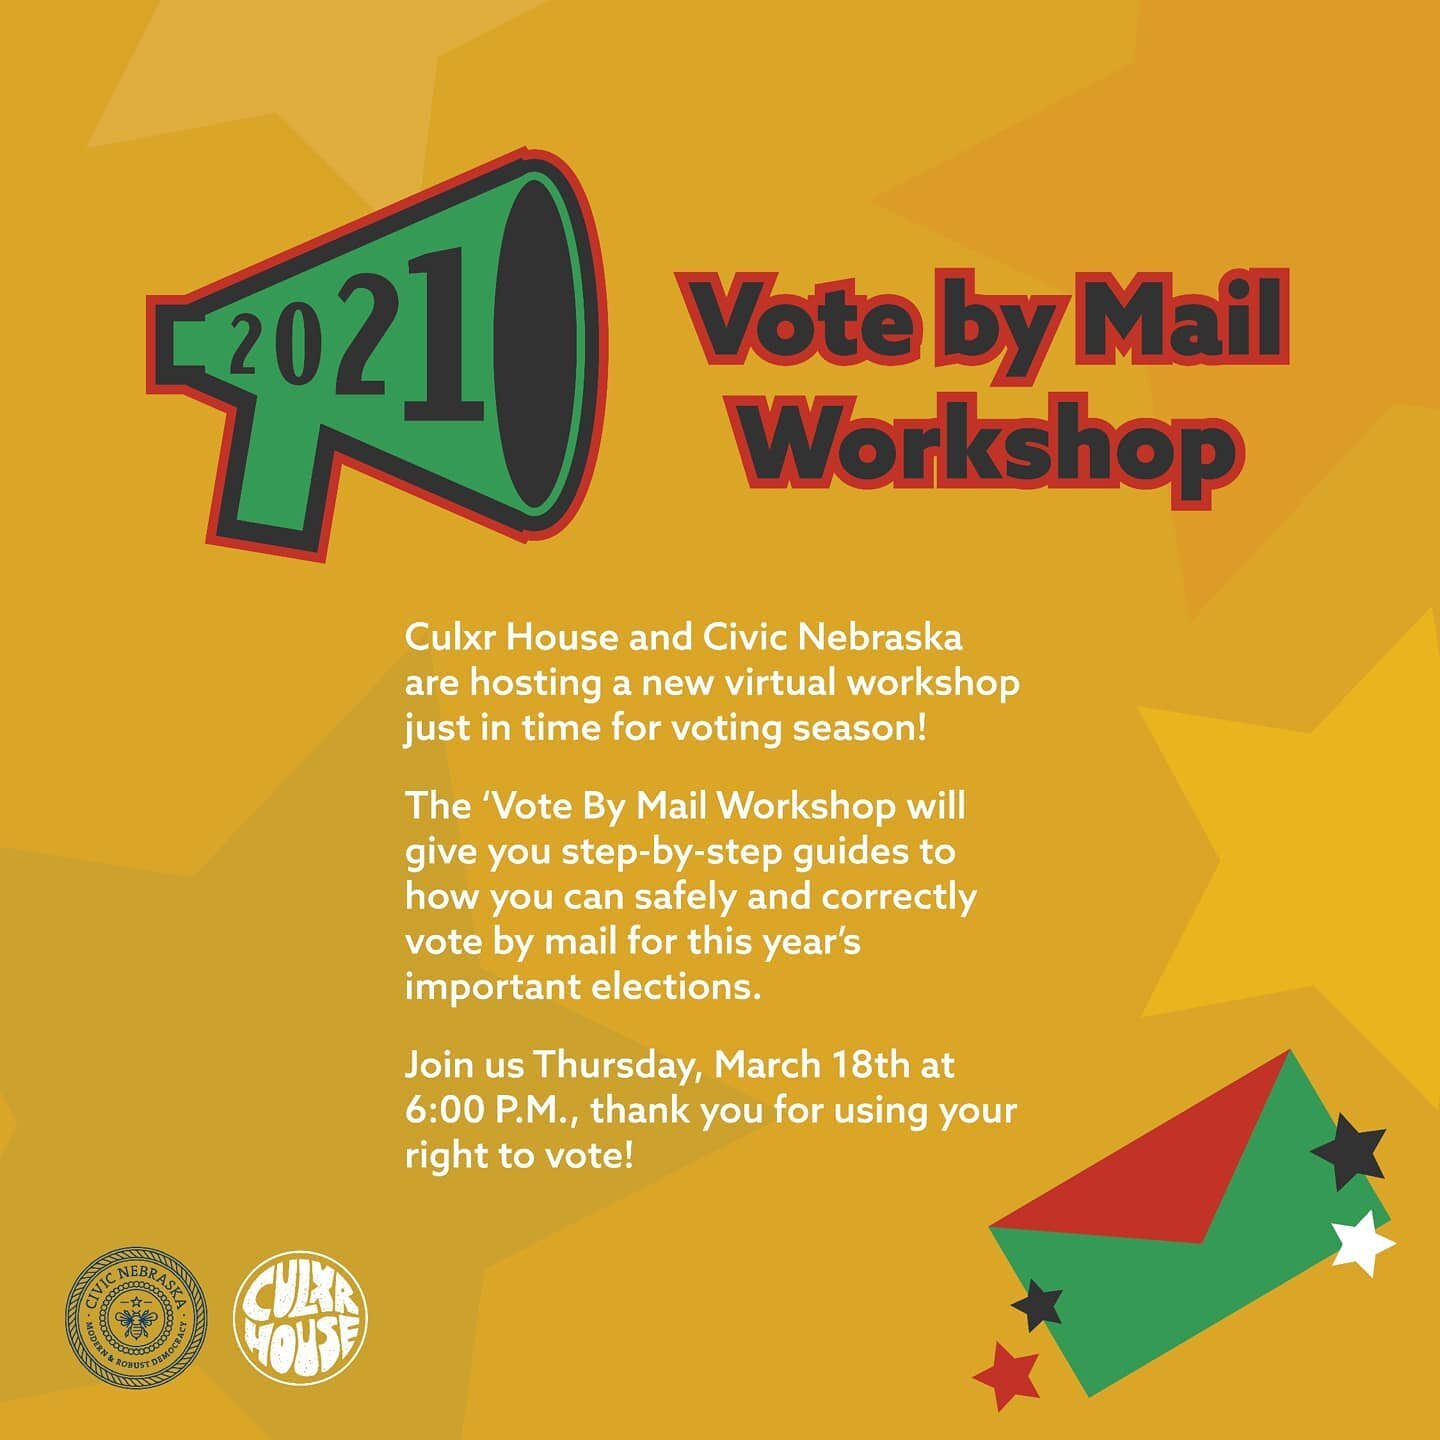 Hey CFam, we have another voting workshop coming to you on Thursday, March 18th!

Join us + @civicnebraska in the Vote By Mail Workshop as we walk you through how to thorougly and securely vote by mail in our upcoming 2021 Omaha Primaries! 

That's 6